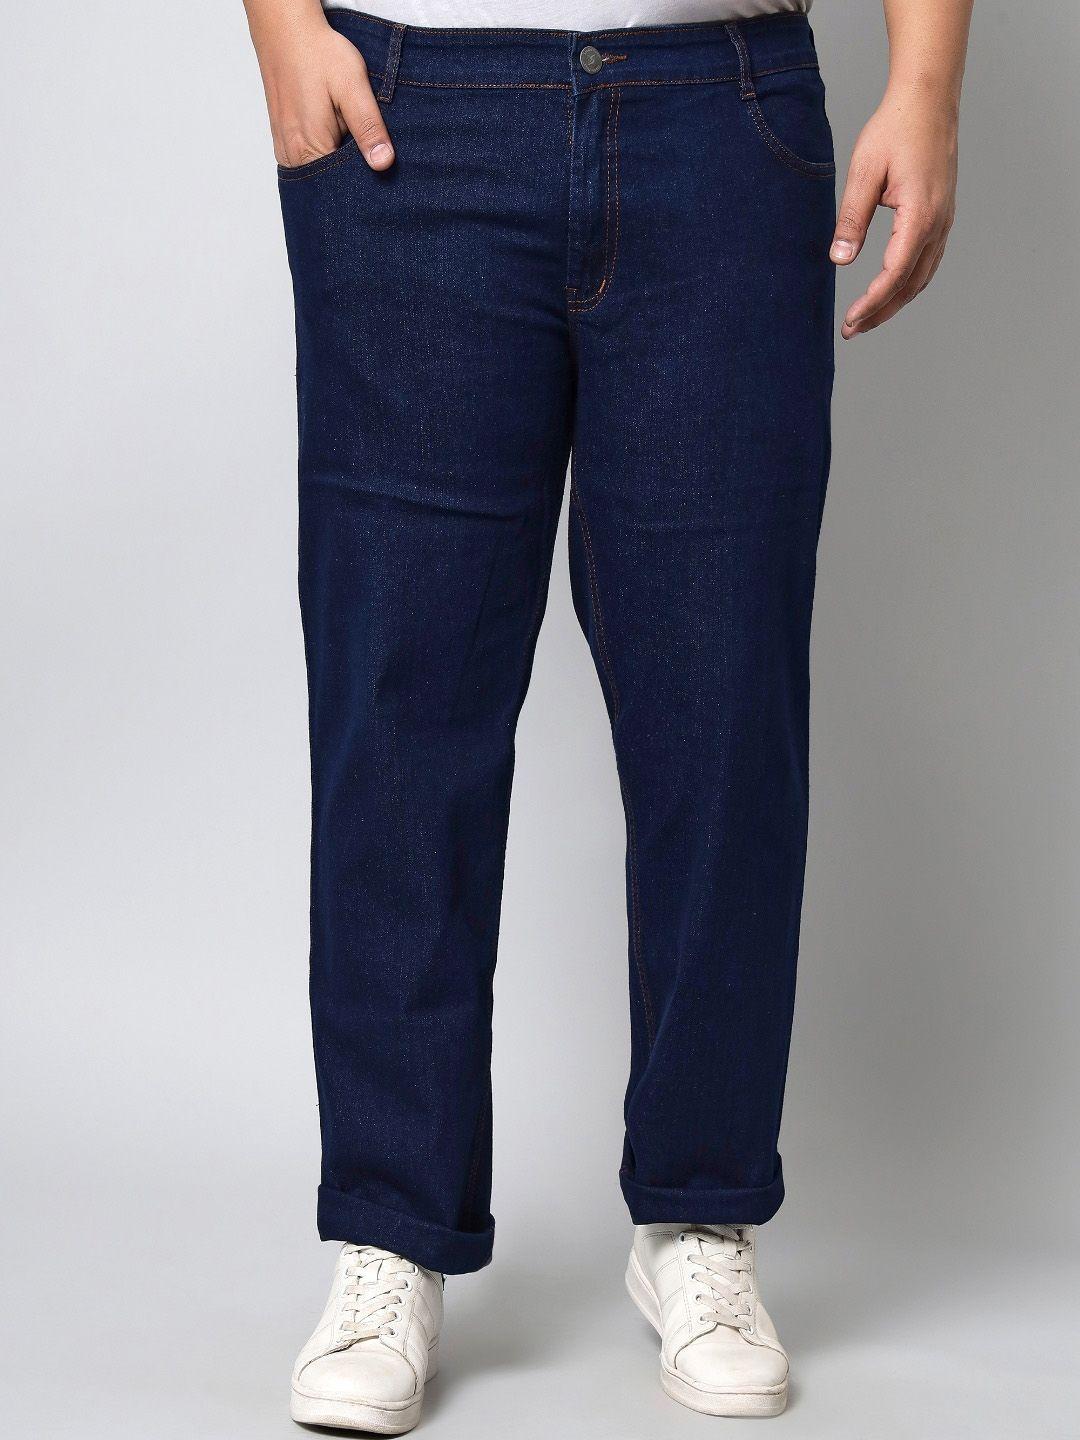 studio-nexx-men-clean-look-relaxed-fit-stretchable-jeans